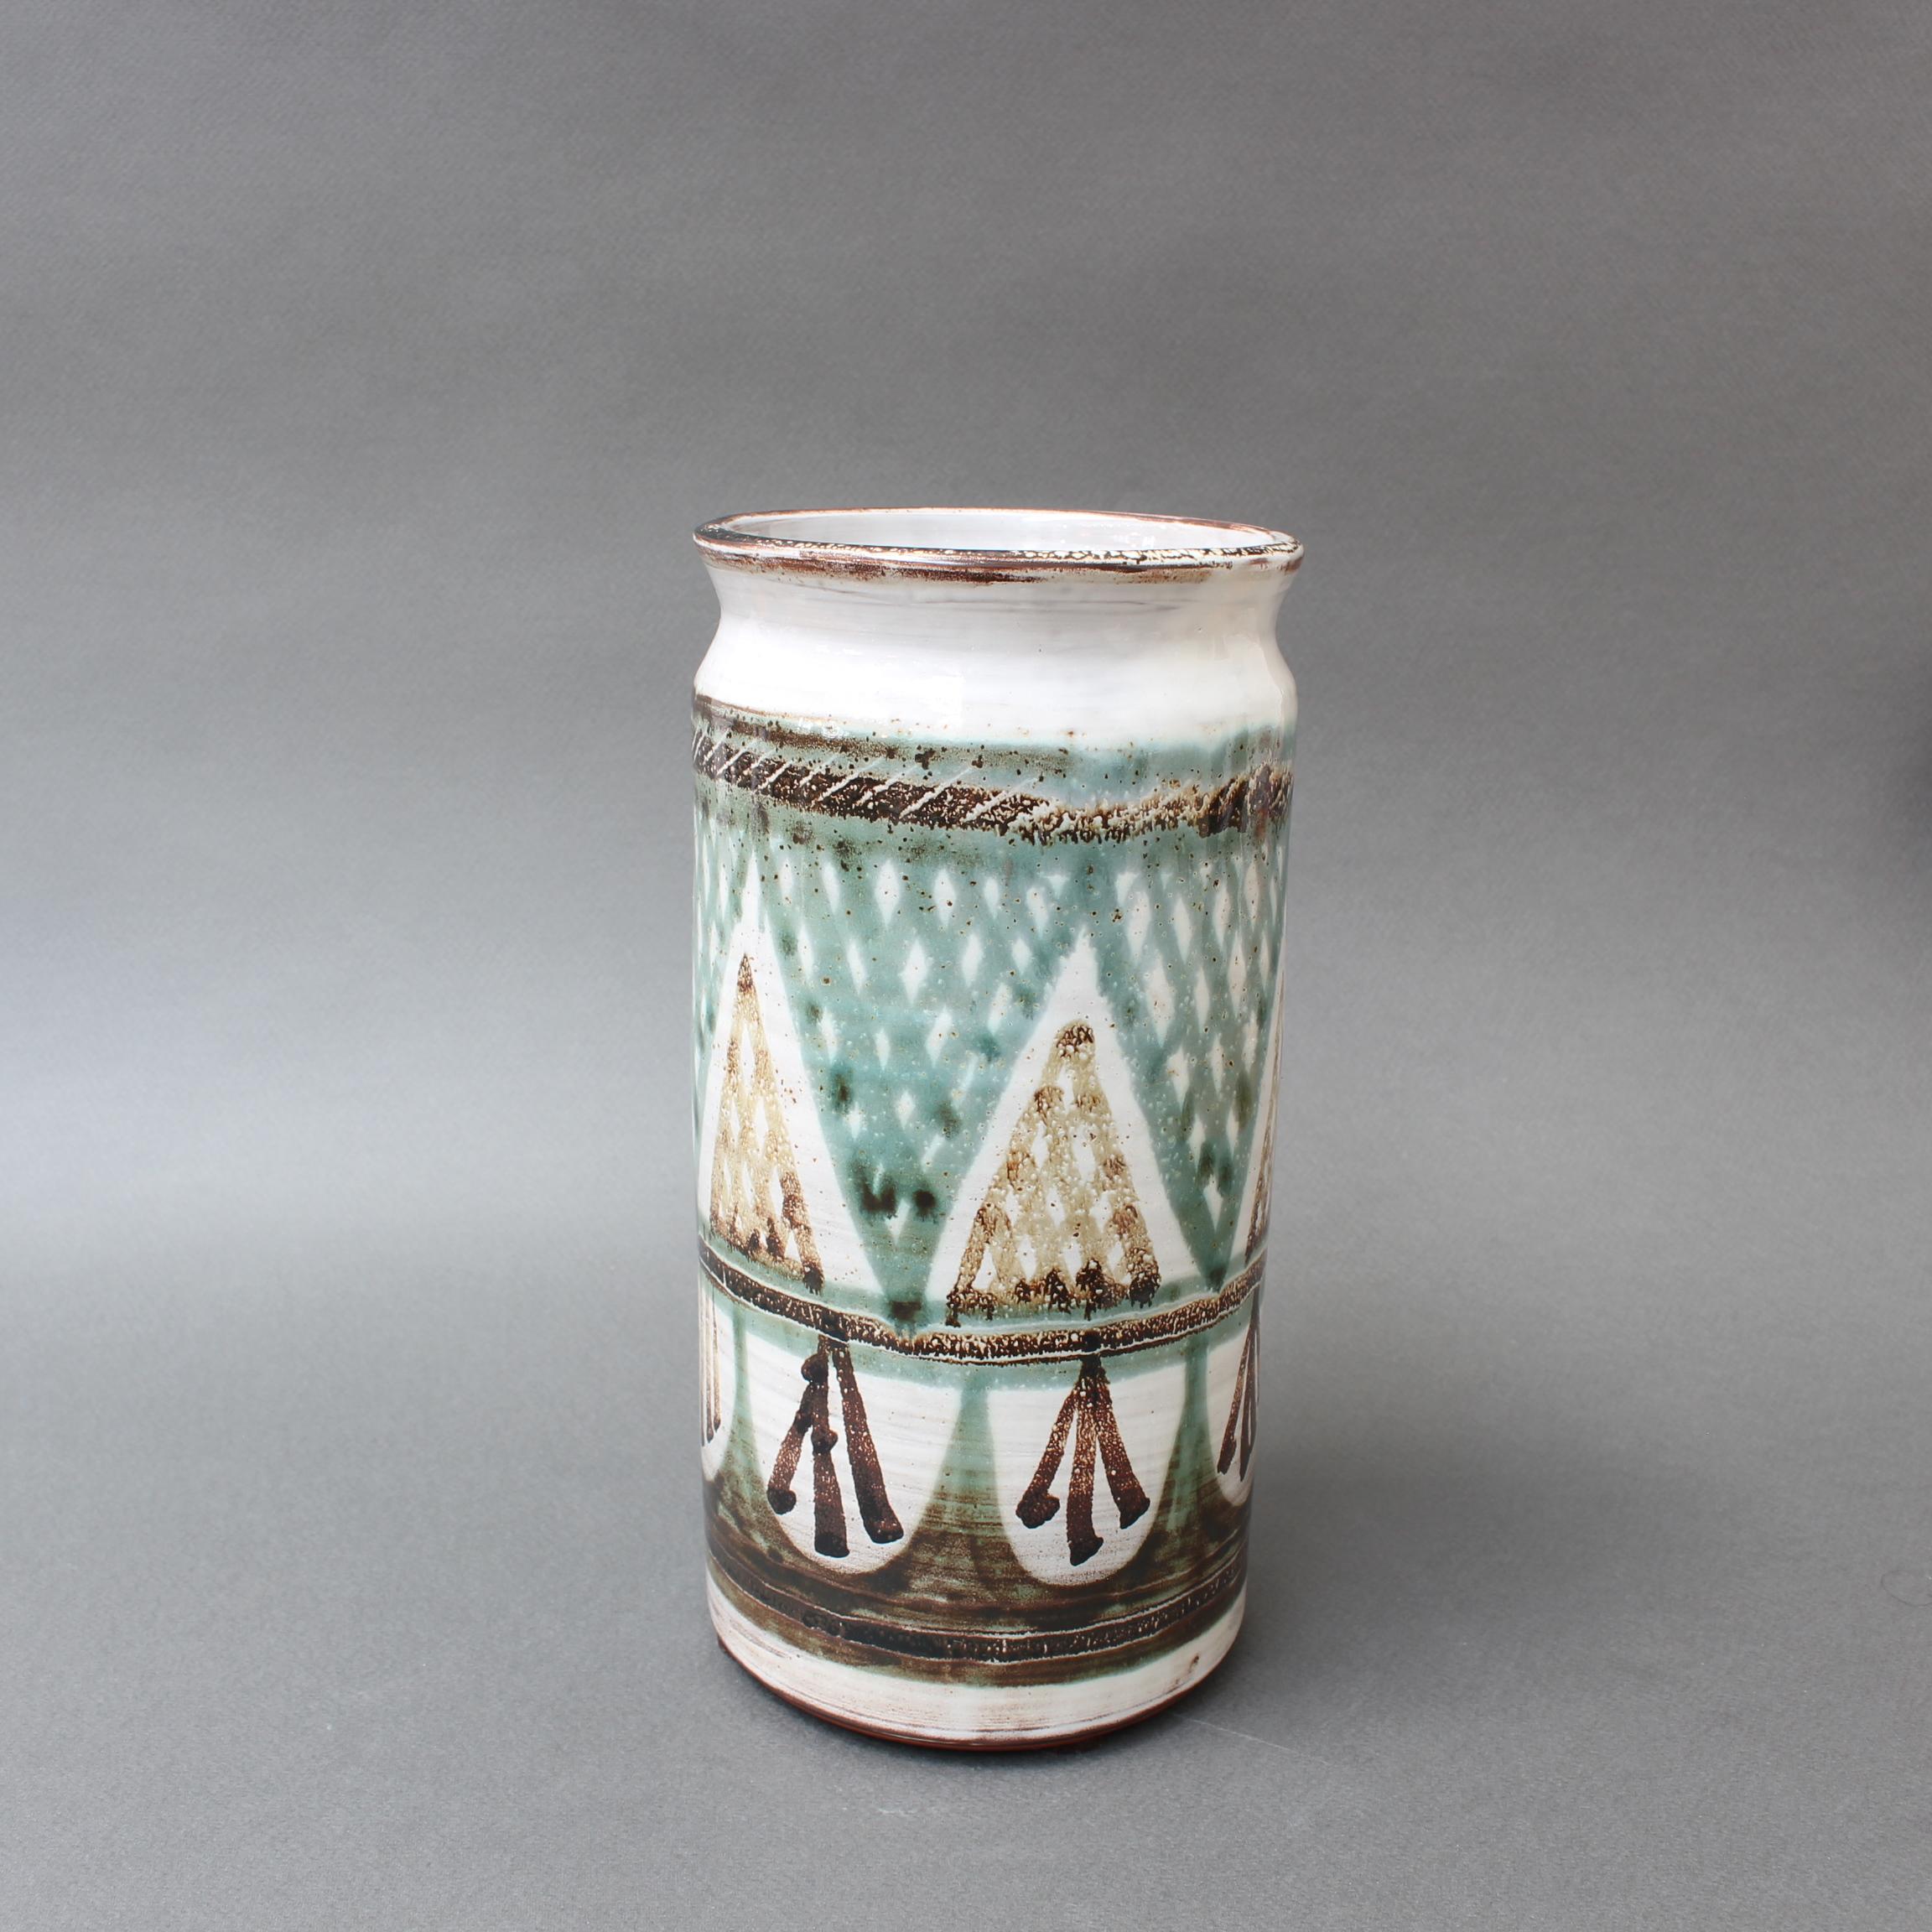 French decorative ceramic vase by Michel Barbier (circa 1960s), Vallauris, France. Abstract triangular shapes with cross-hatch patterns in jade green and dark brown encircle the vase. At the top of the decorated portion, a repeating rope pattern